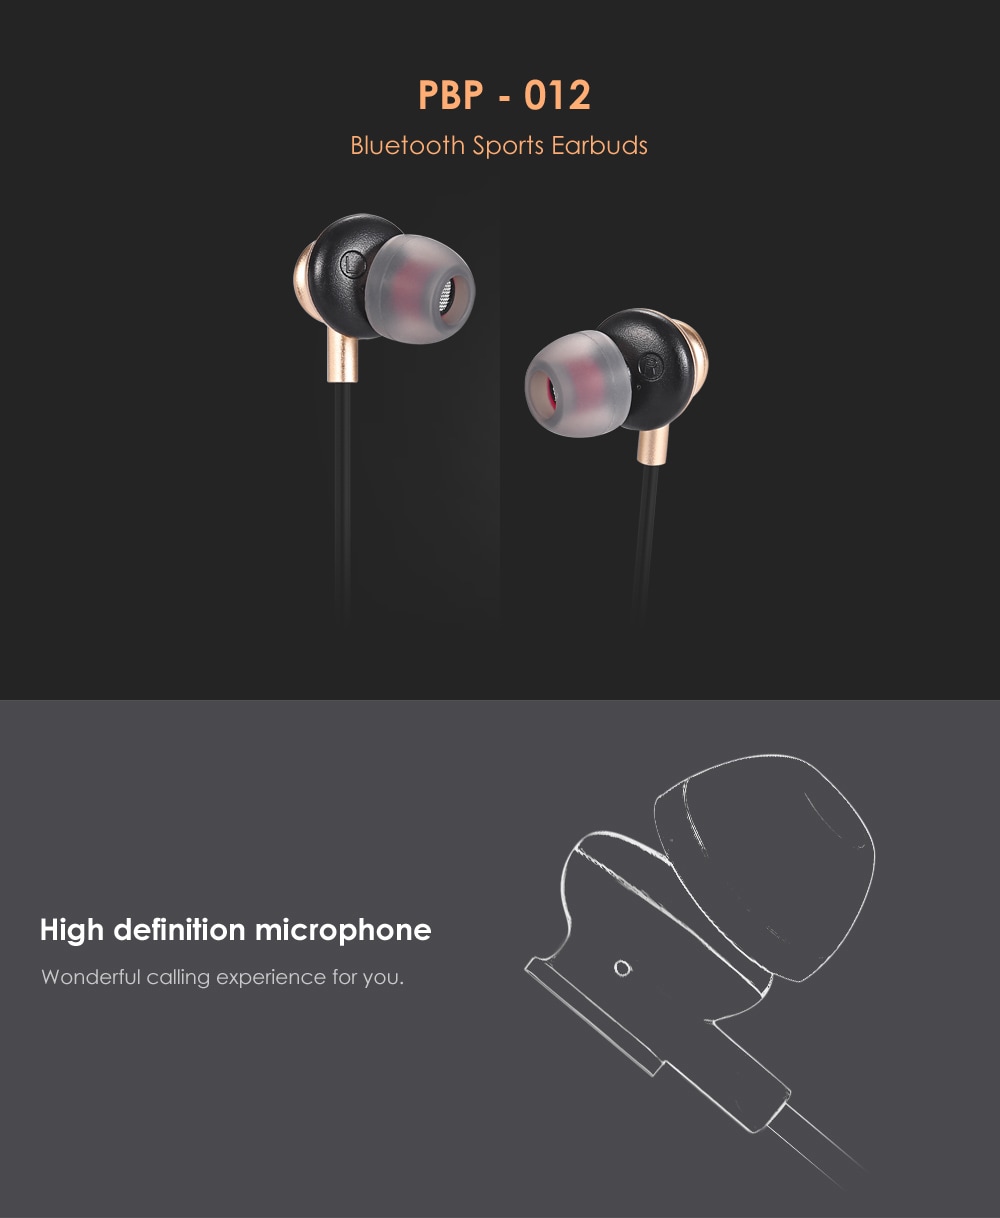 PBP - 012 Bluetooth Sports Earbuds with Mic Support Hands-free Calls- Golden